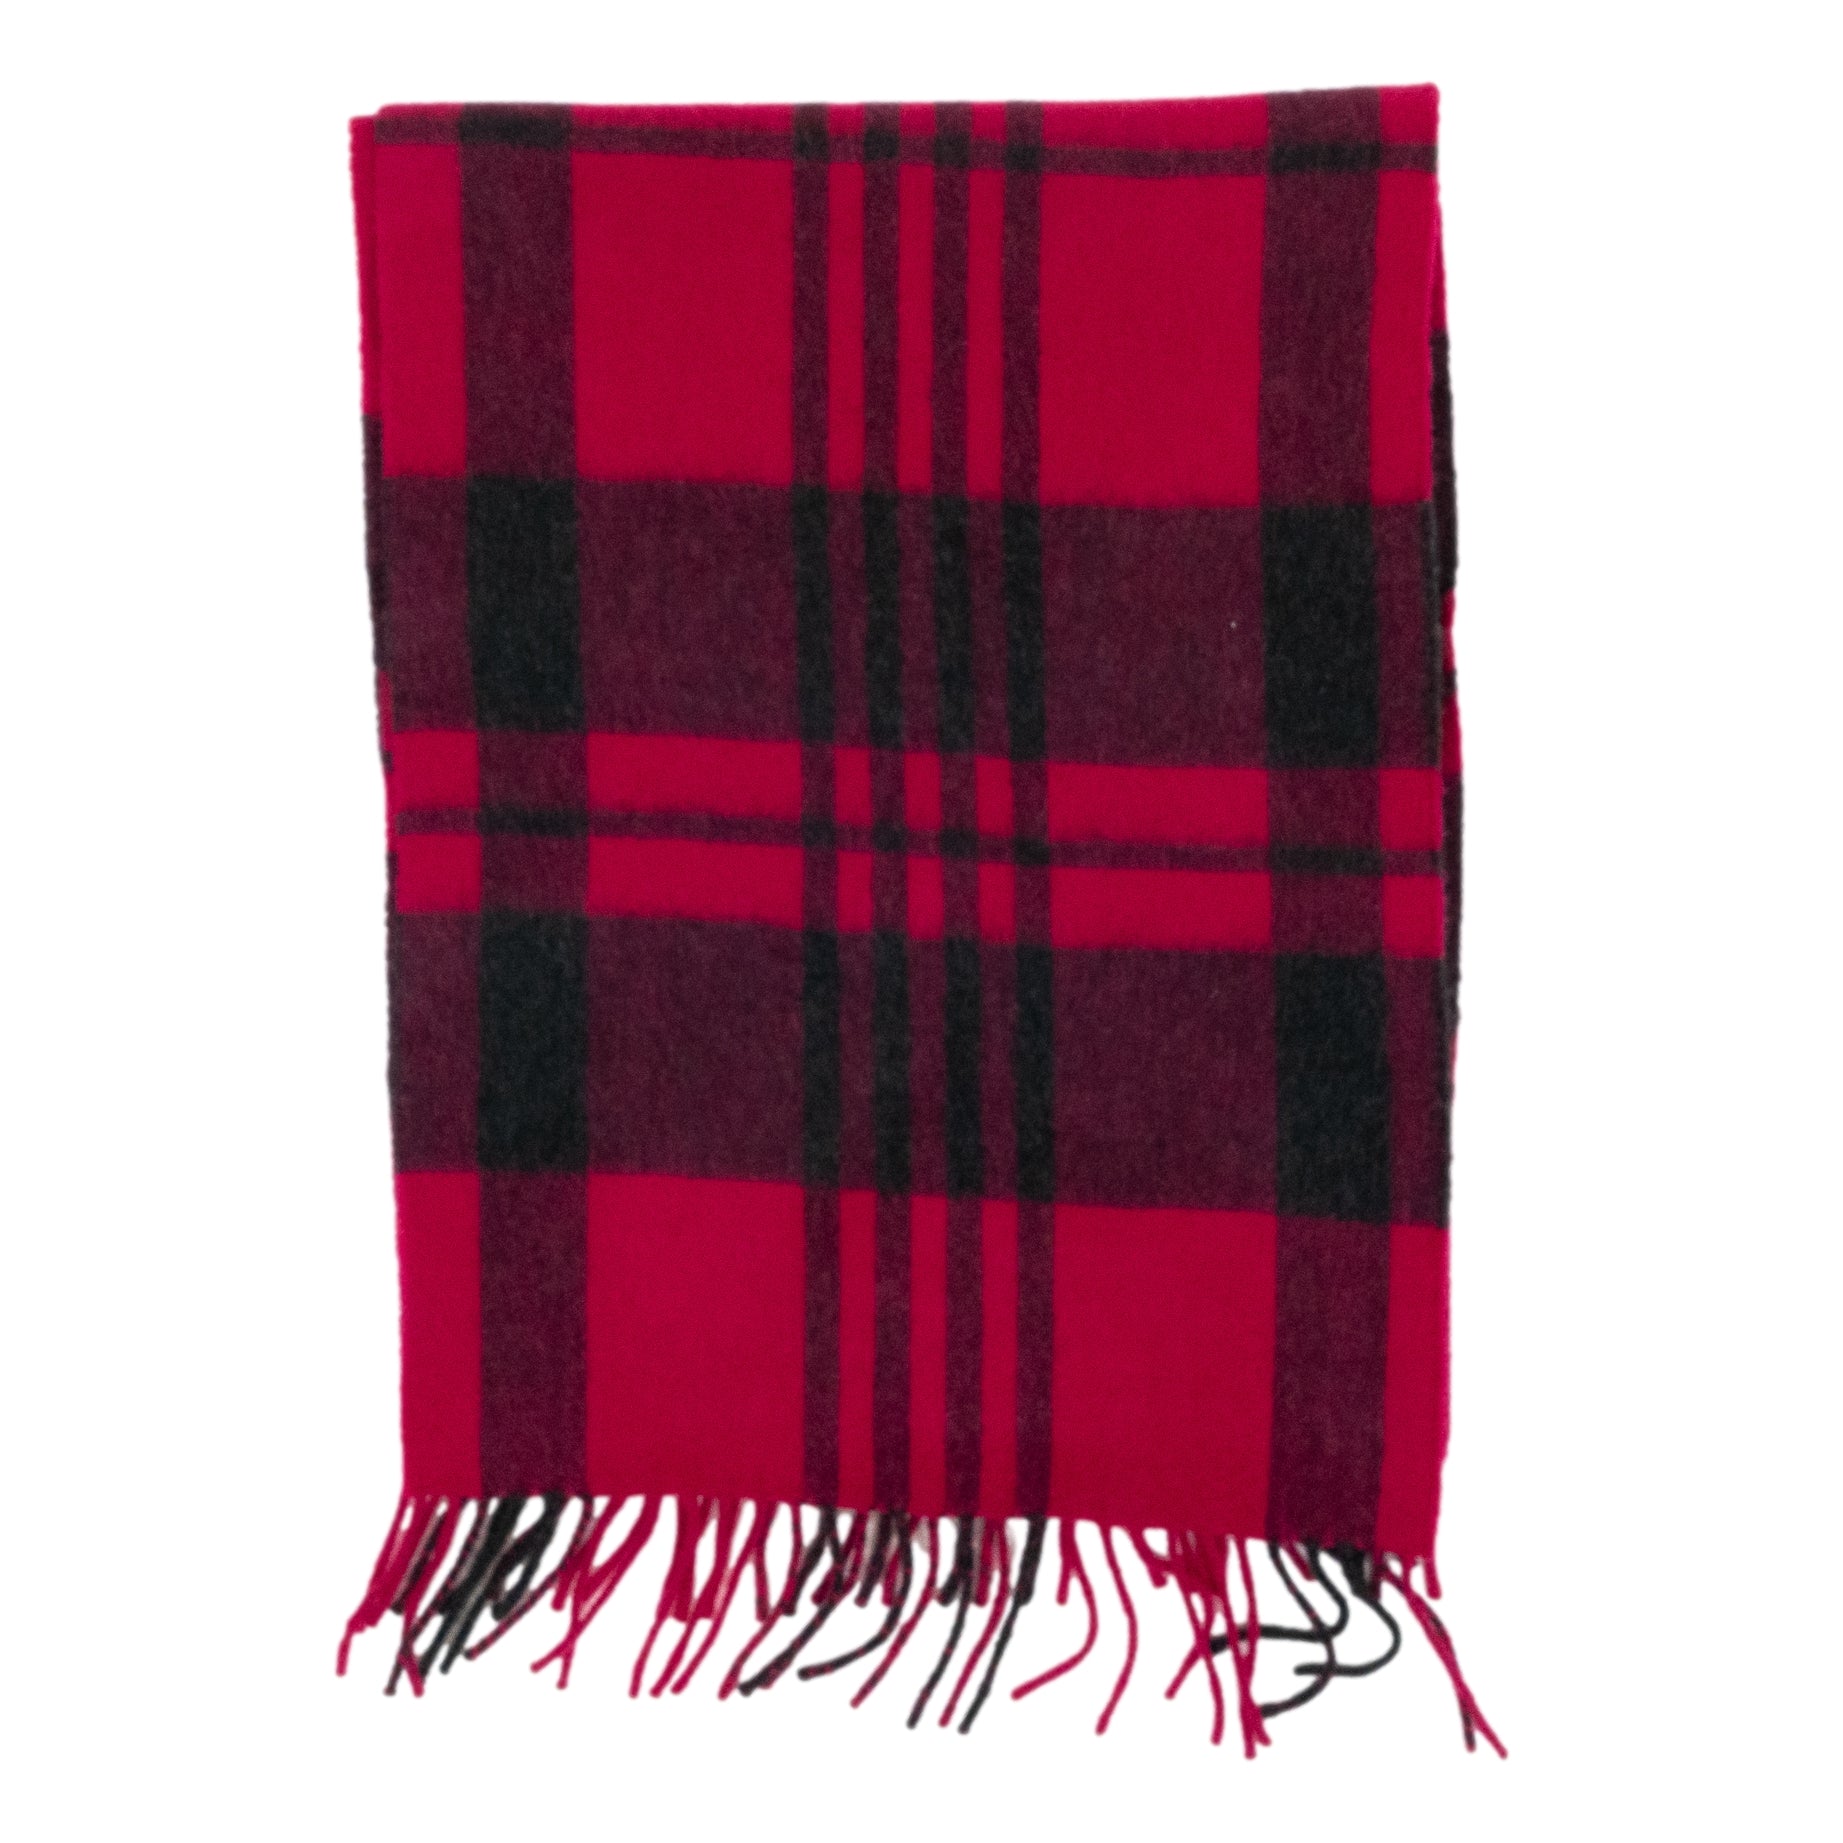 Ingles Beet Root Cashmere Plaid Scarf